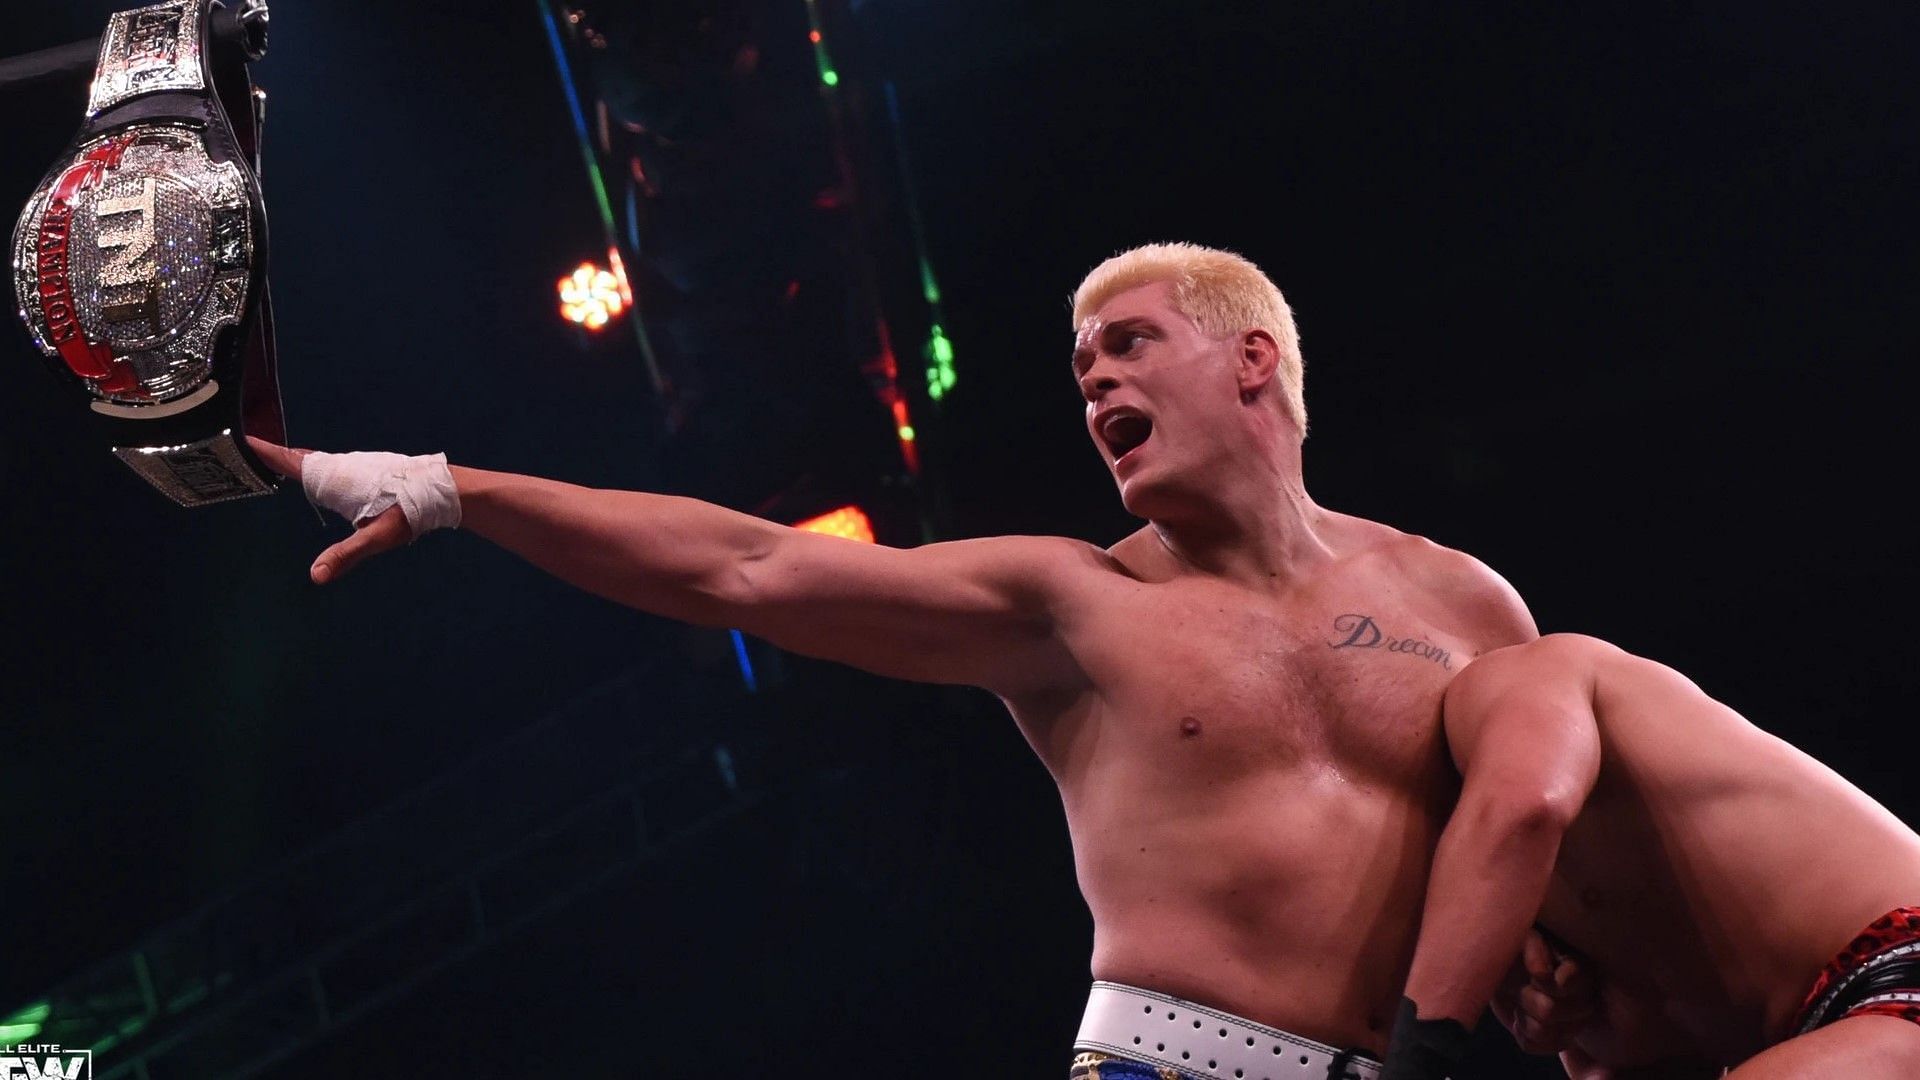 Cody Rhodes reaches for the AEW TNT Championship in his last match